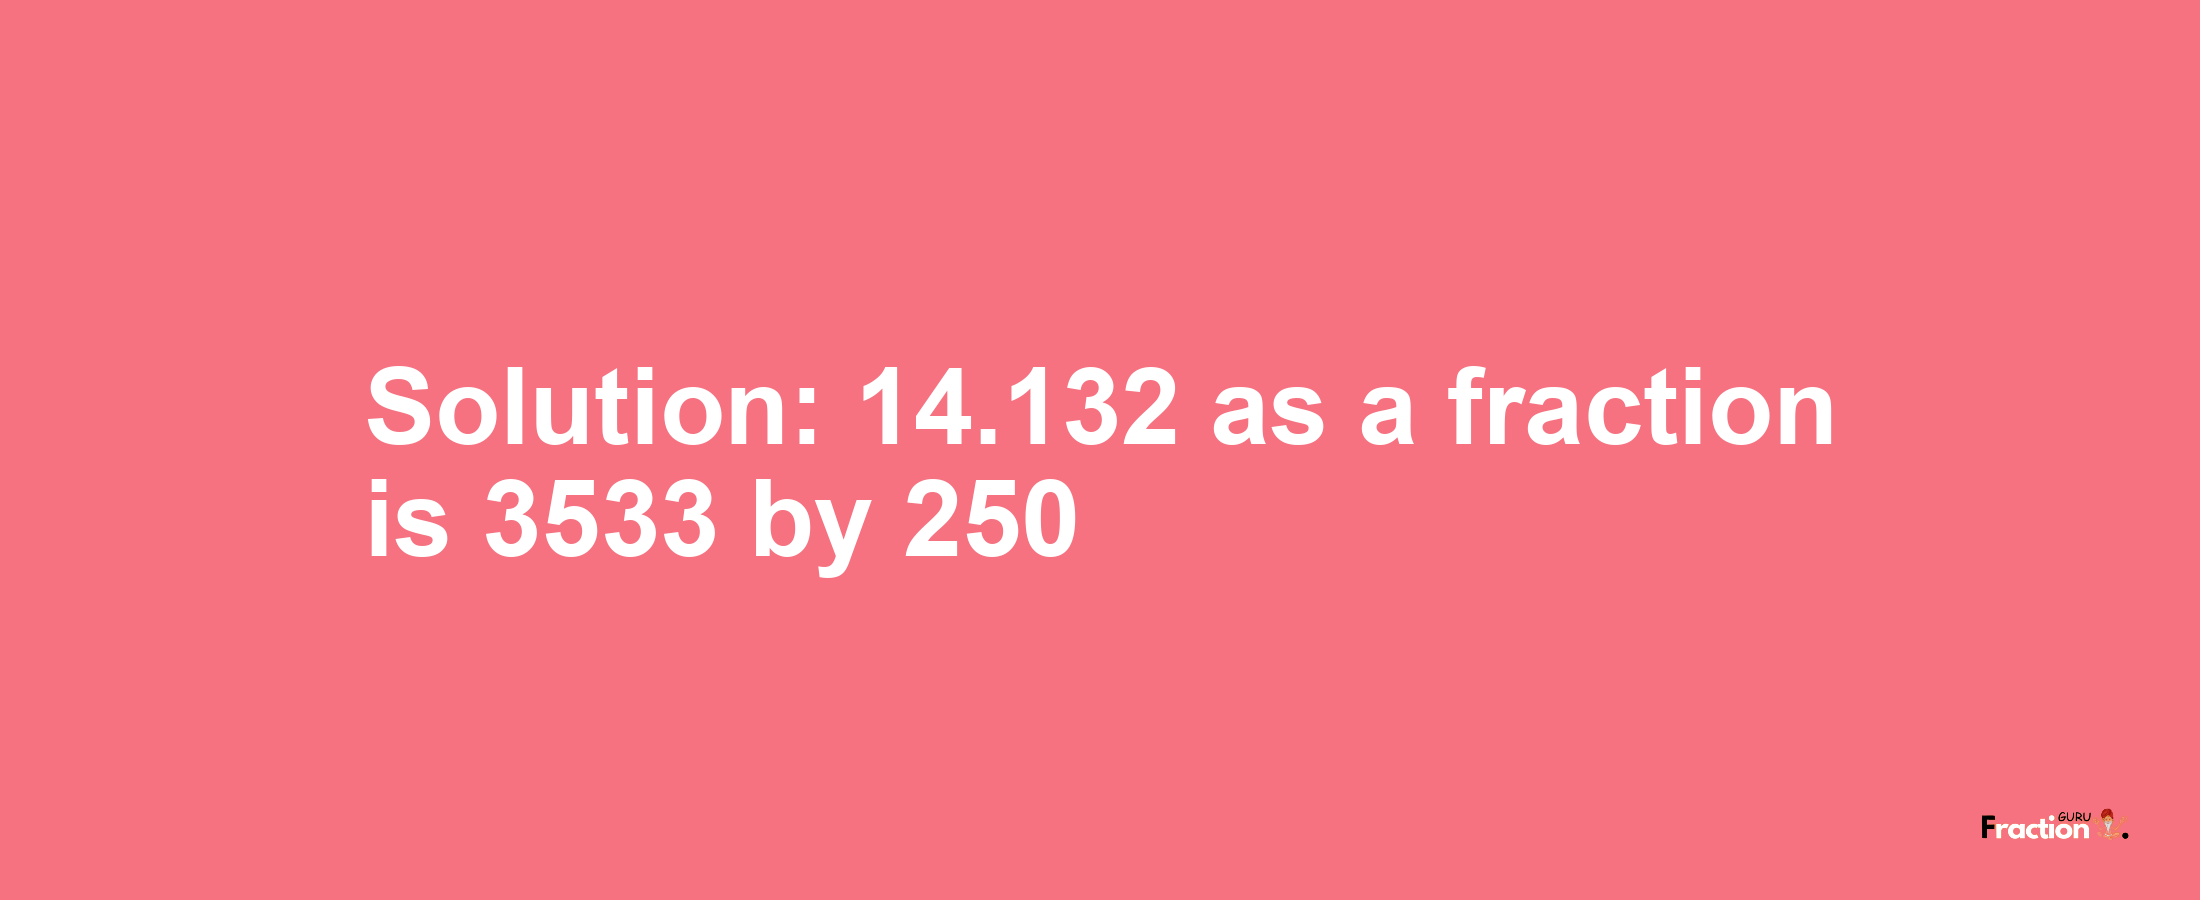 Solution:14.132 as a fraction is 3533/250